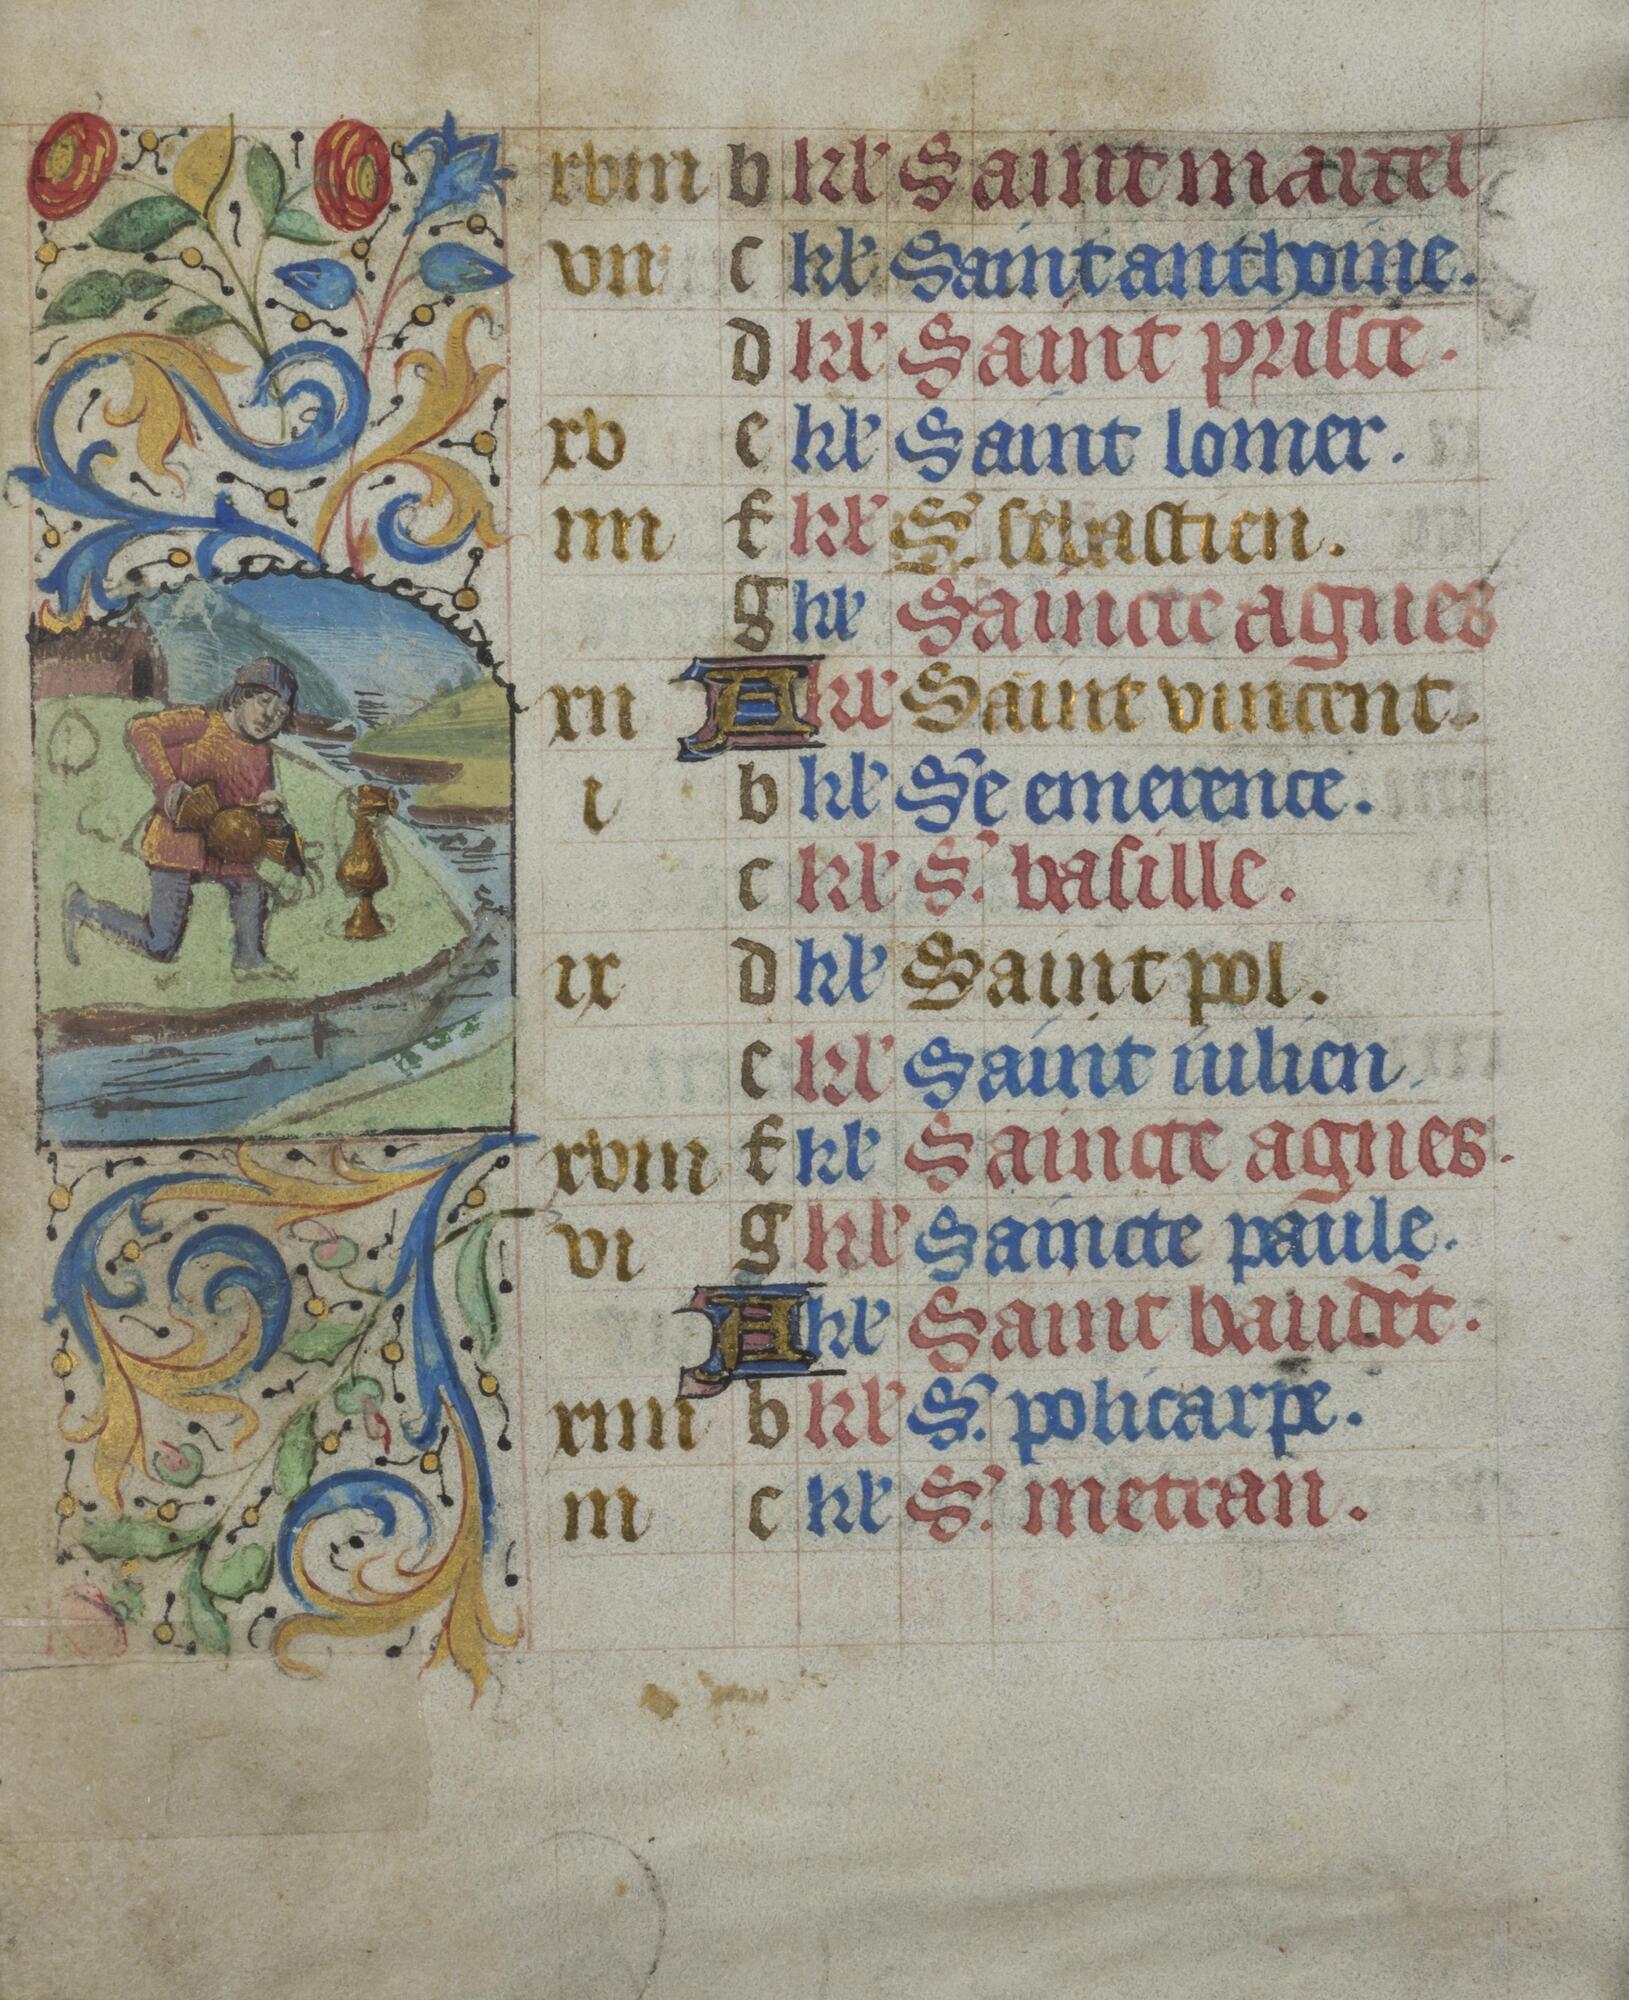 A double-sided illuminated manuscript leaf with three columns of text in gold leaf,&nbsp;red, and blue French blackletter script encased by a floriated border. There are two&nbsp;small miniatures, one on either side of the leaf, framed in arched compartments.<br />
<br />
The illustrated compartment on the recto features a seated man wearing a long blue&nbsp;tunic and red cap seated at a table in an interior marked by a stone fireplace. A&nbsp;smaller servant boy dressed in a long tunic presents the man with a platter. The&nbsp;compartment on the verso contains a landscape with a winding river where a man&nbsp;kneels, dressed in pants and a tunic shirt, and draws water into copper jugs.